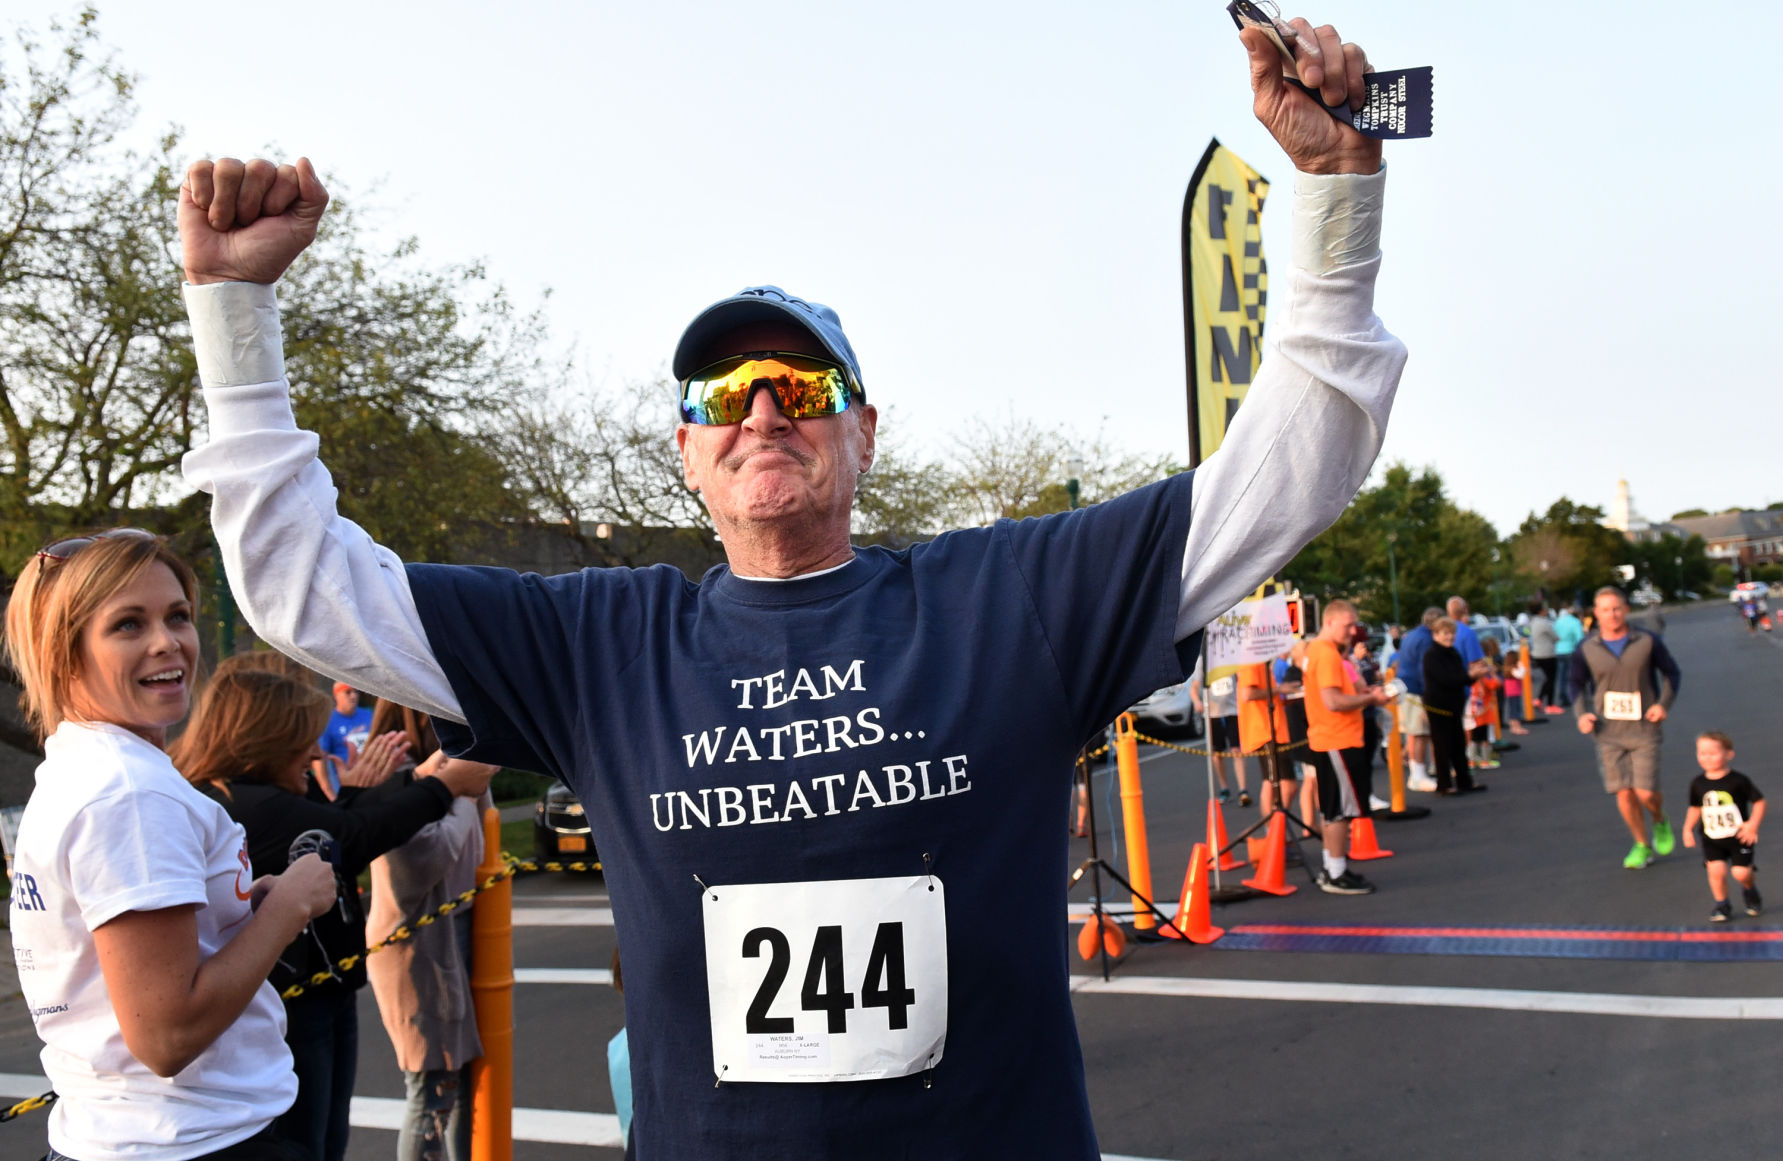 Jim Waters, who has stage IV colon cancer, raises his arms in victory after finishing the Downtown Auburn Mile in August. (PHOTO BY KEVIN RIVOLI/THE AUBURN CITIZEN/AUBURNPUB.COM)